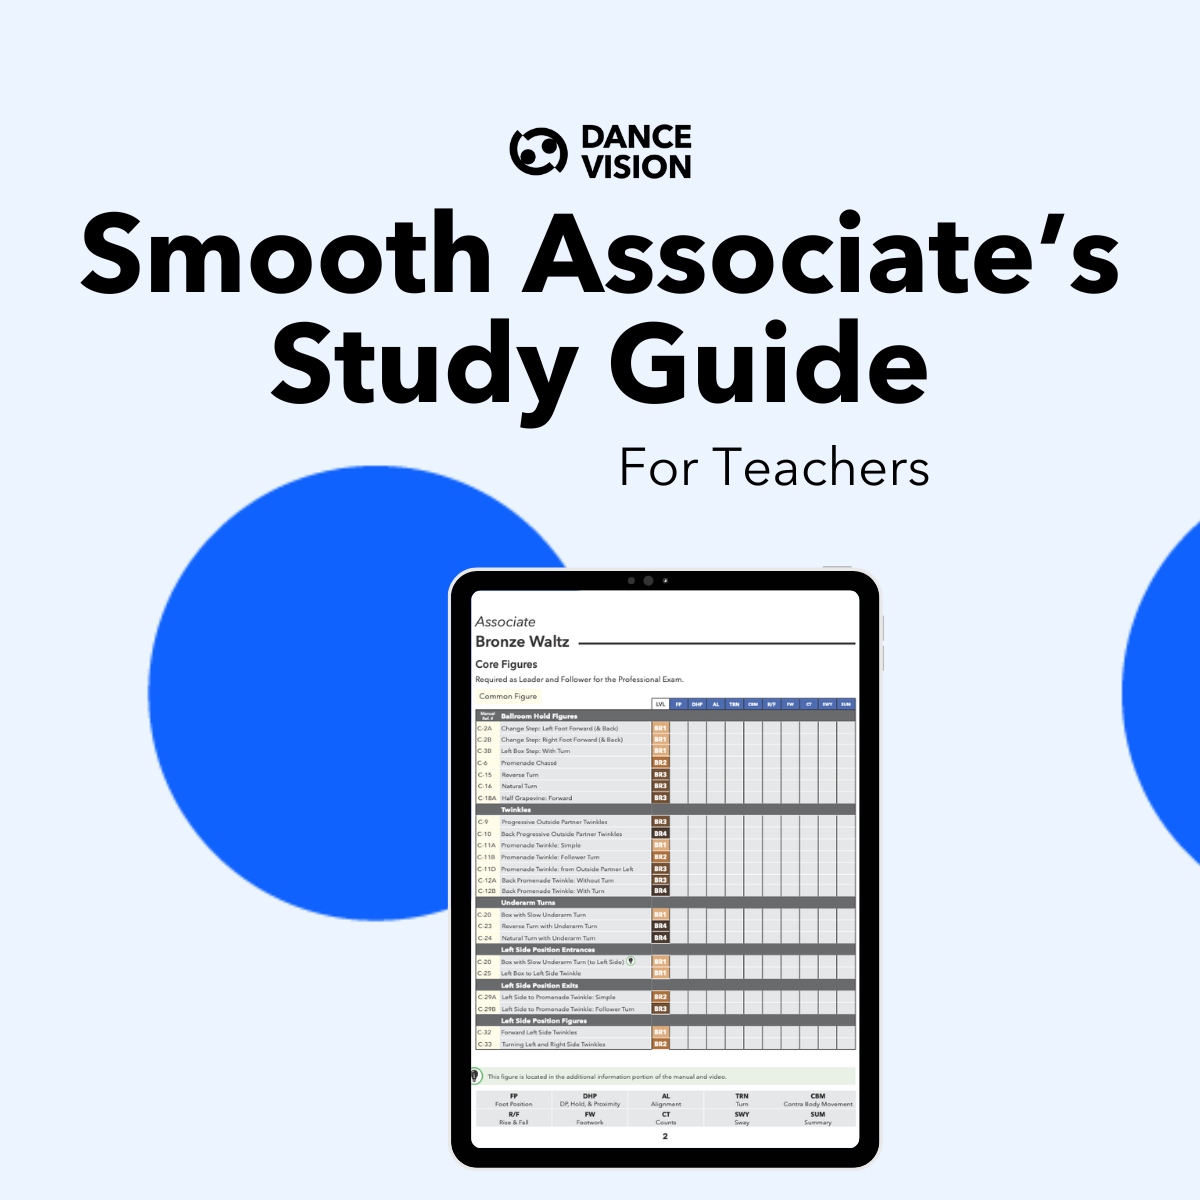 A free study guide for teachers to prepare for the Dance Vision American Smooth Associate's Certification.